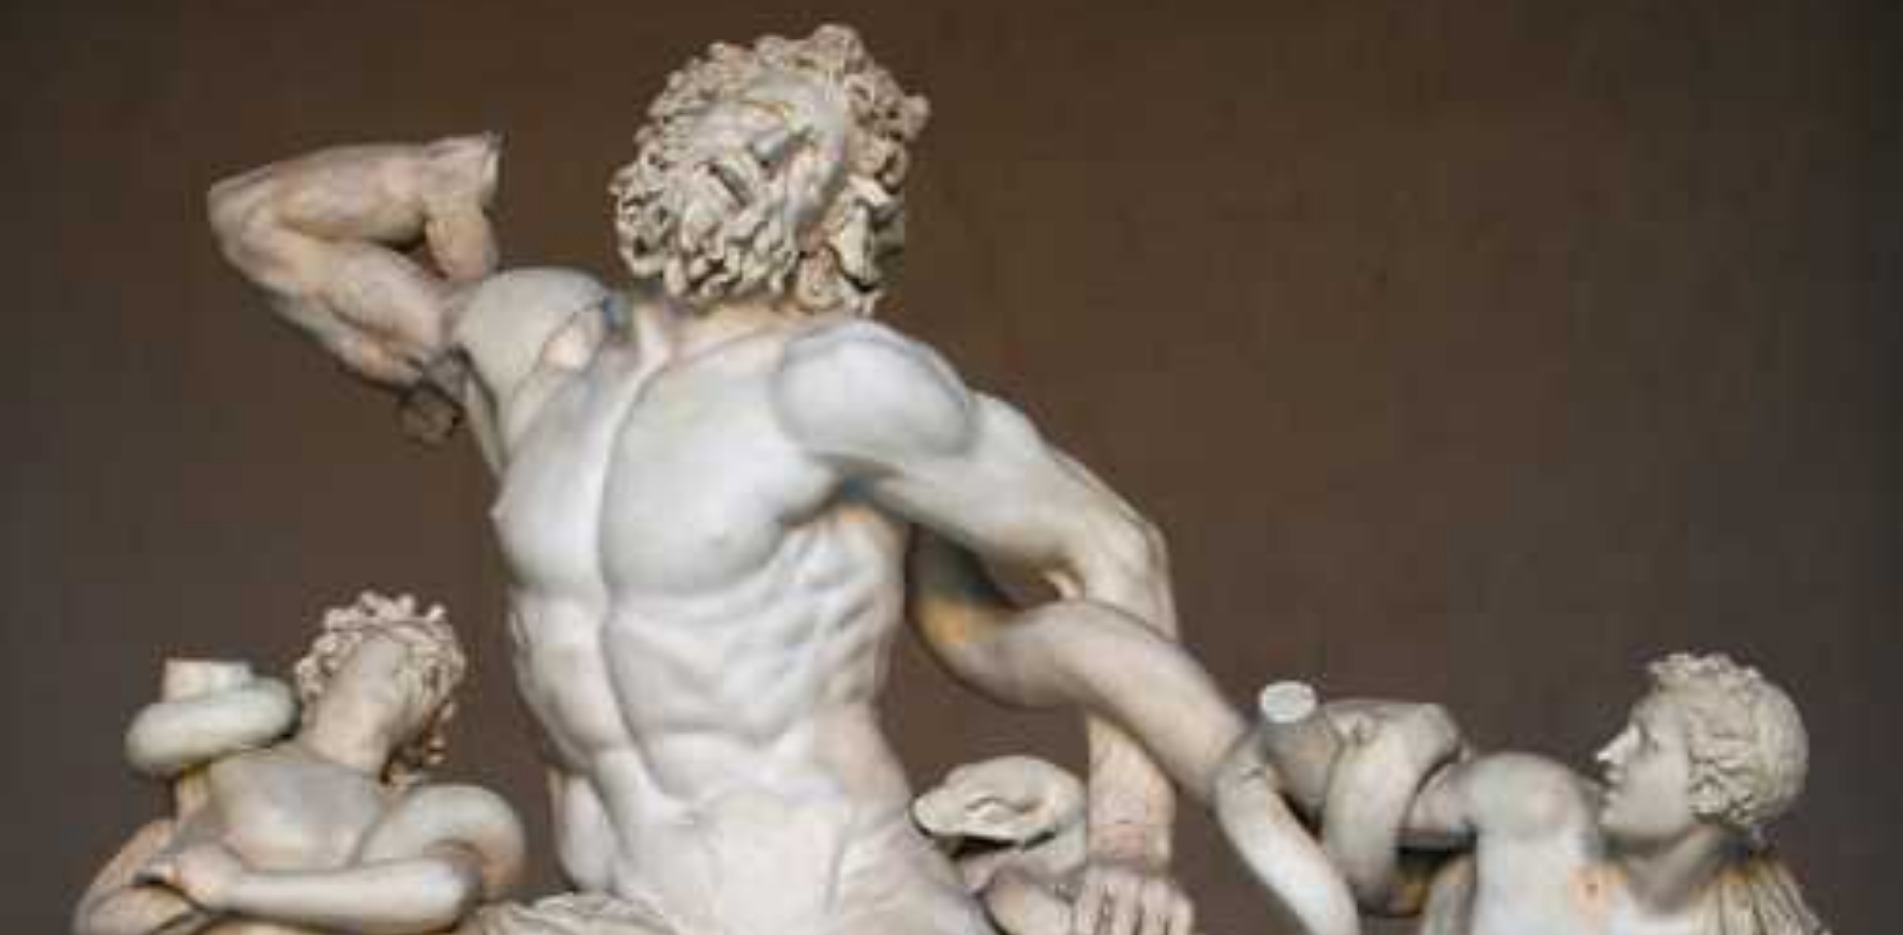  - The Revival of Marble Art During Renaissance